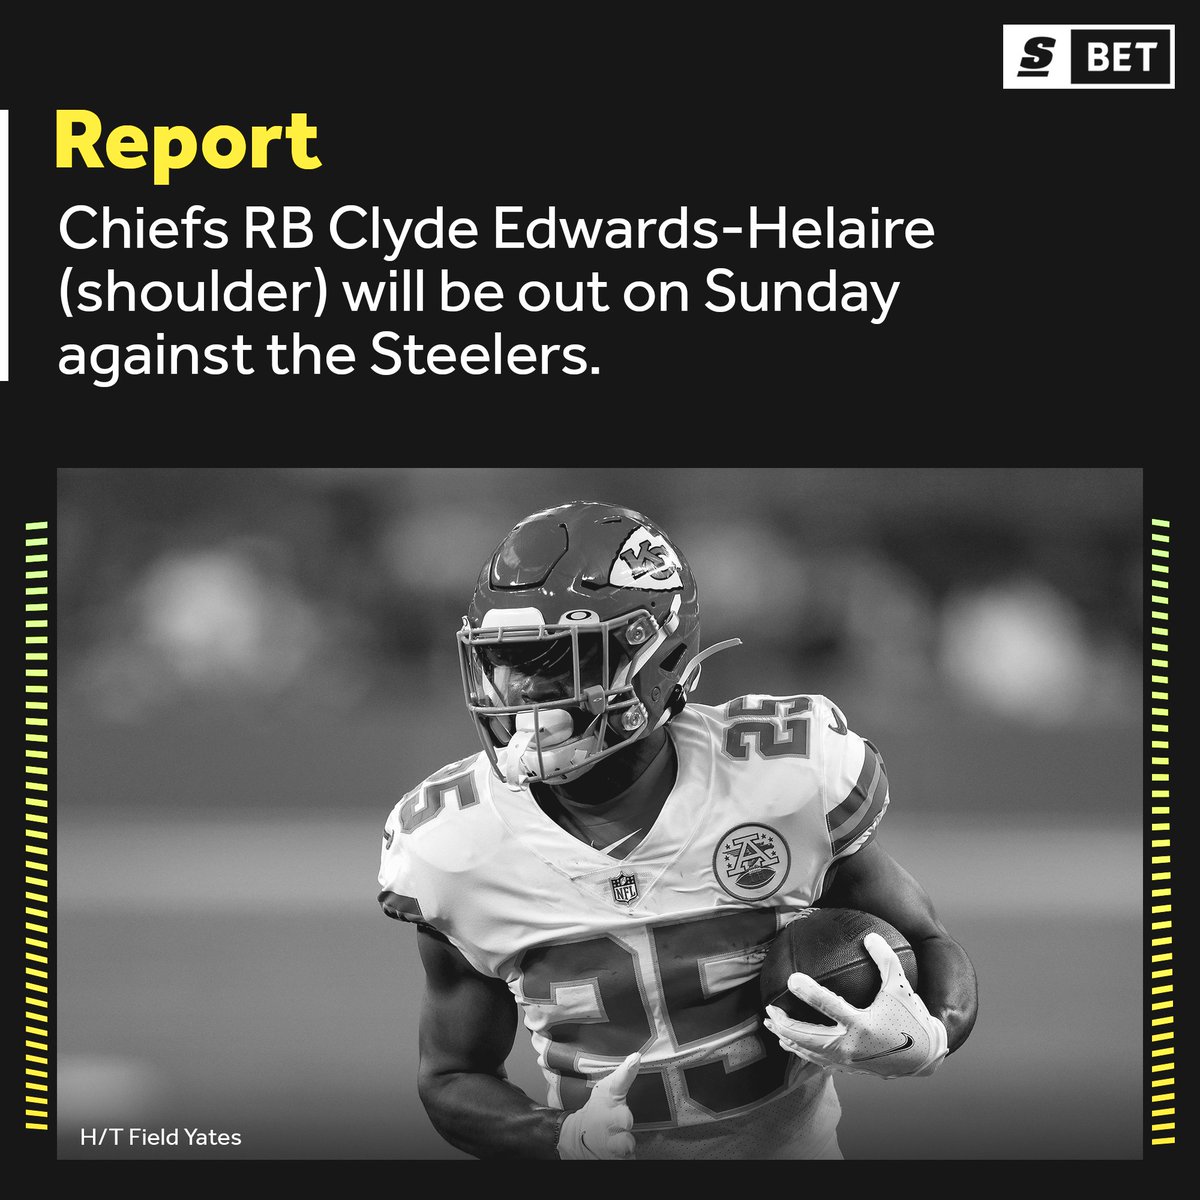 @theScoreBet's photo on Clyde Edwards